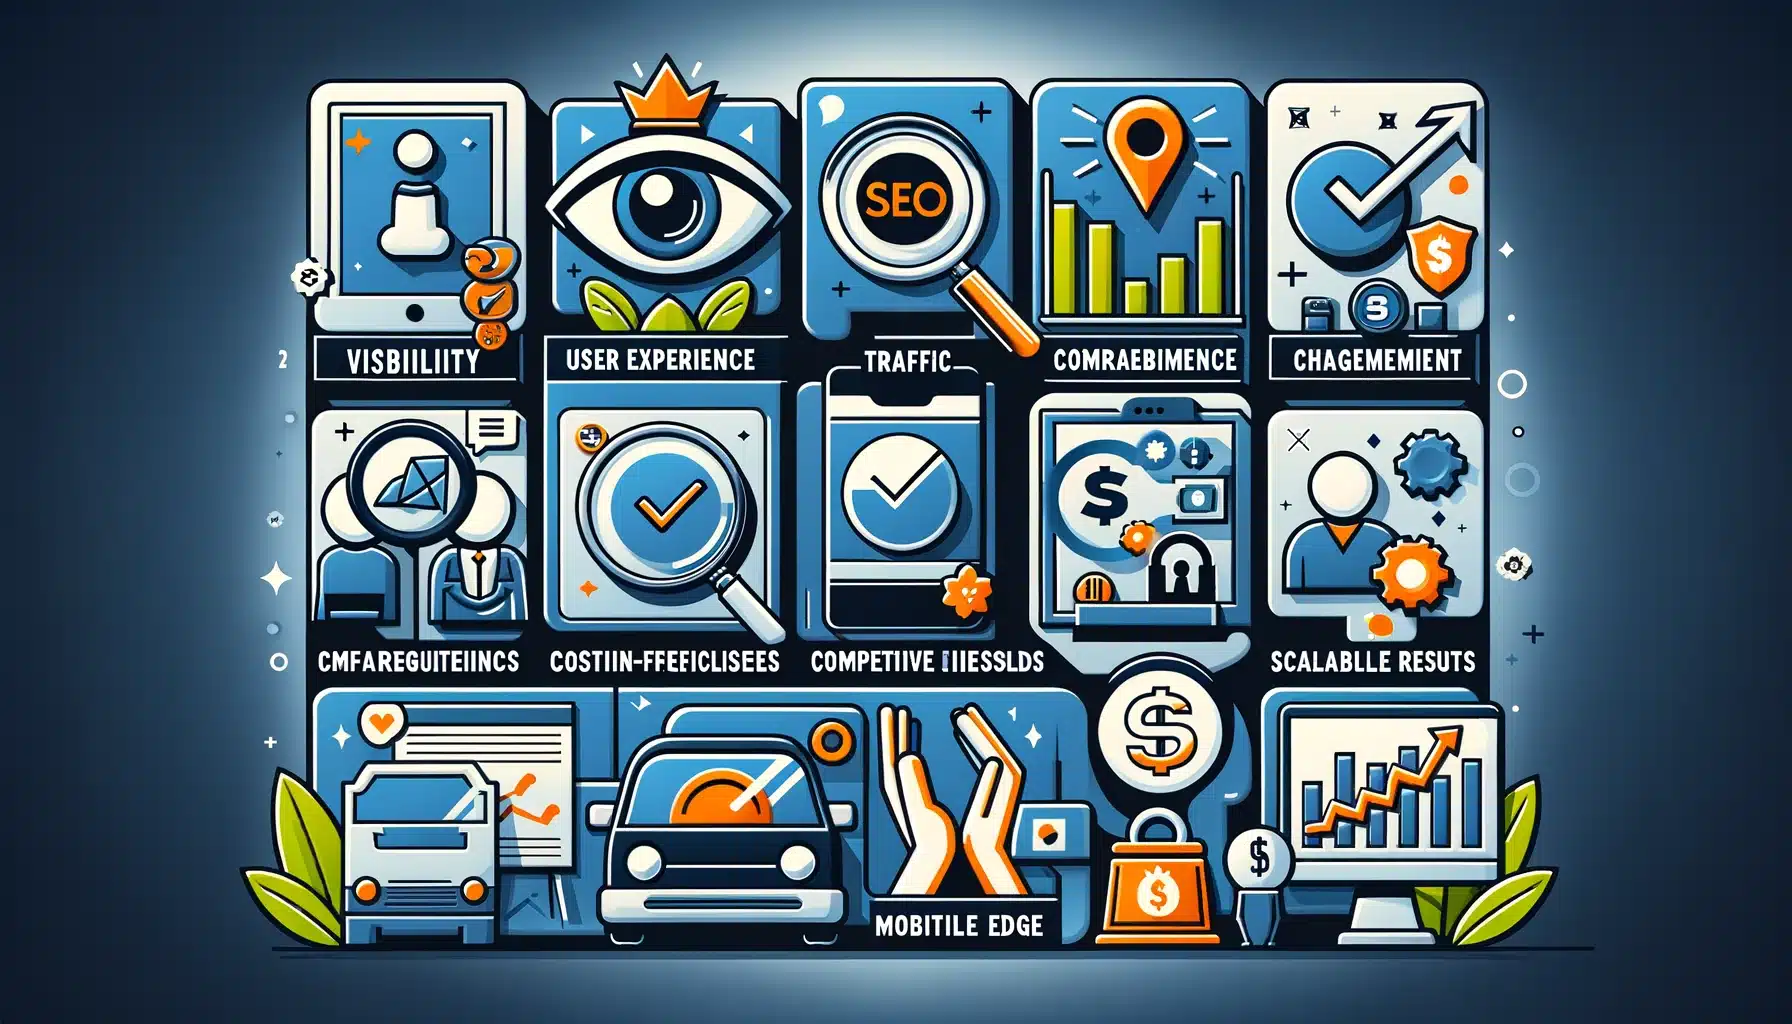 A visual representation of the benefits of SEO using simple and clear icons.